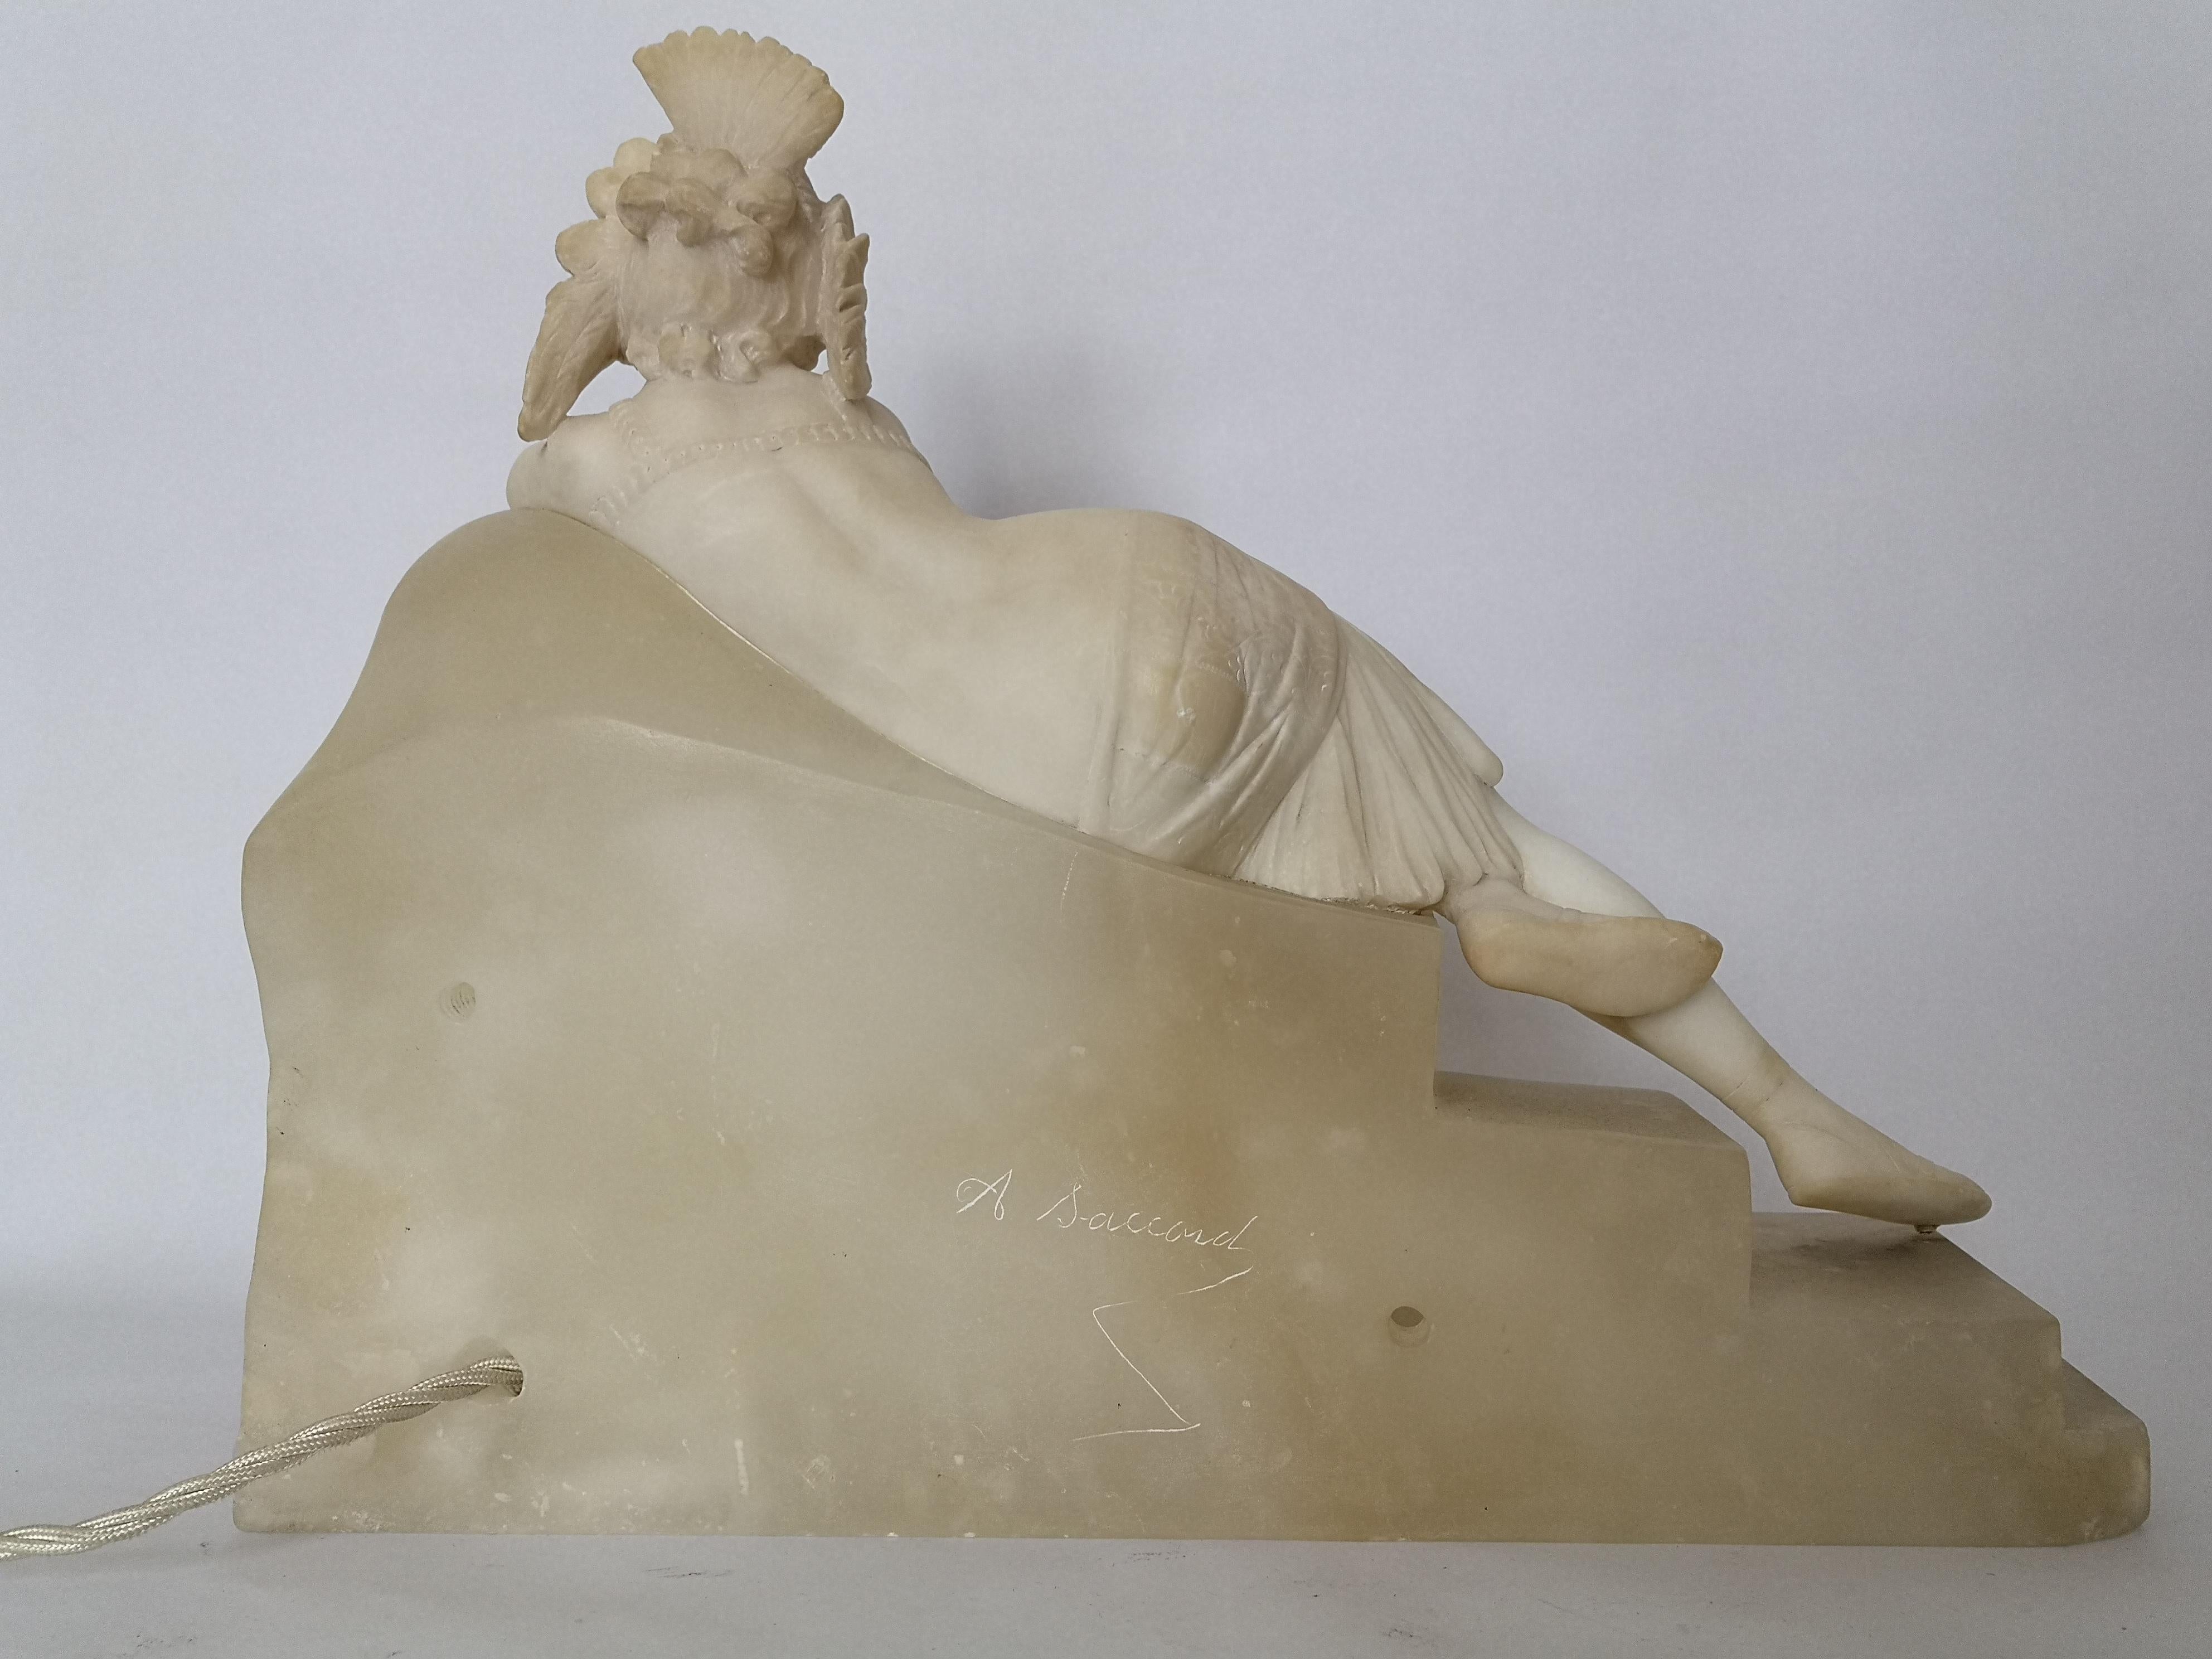 20th Century Art Deco Fantasy Sculpture / Lamp of a Lady on a Sphinx 2